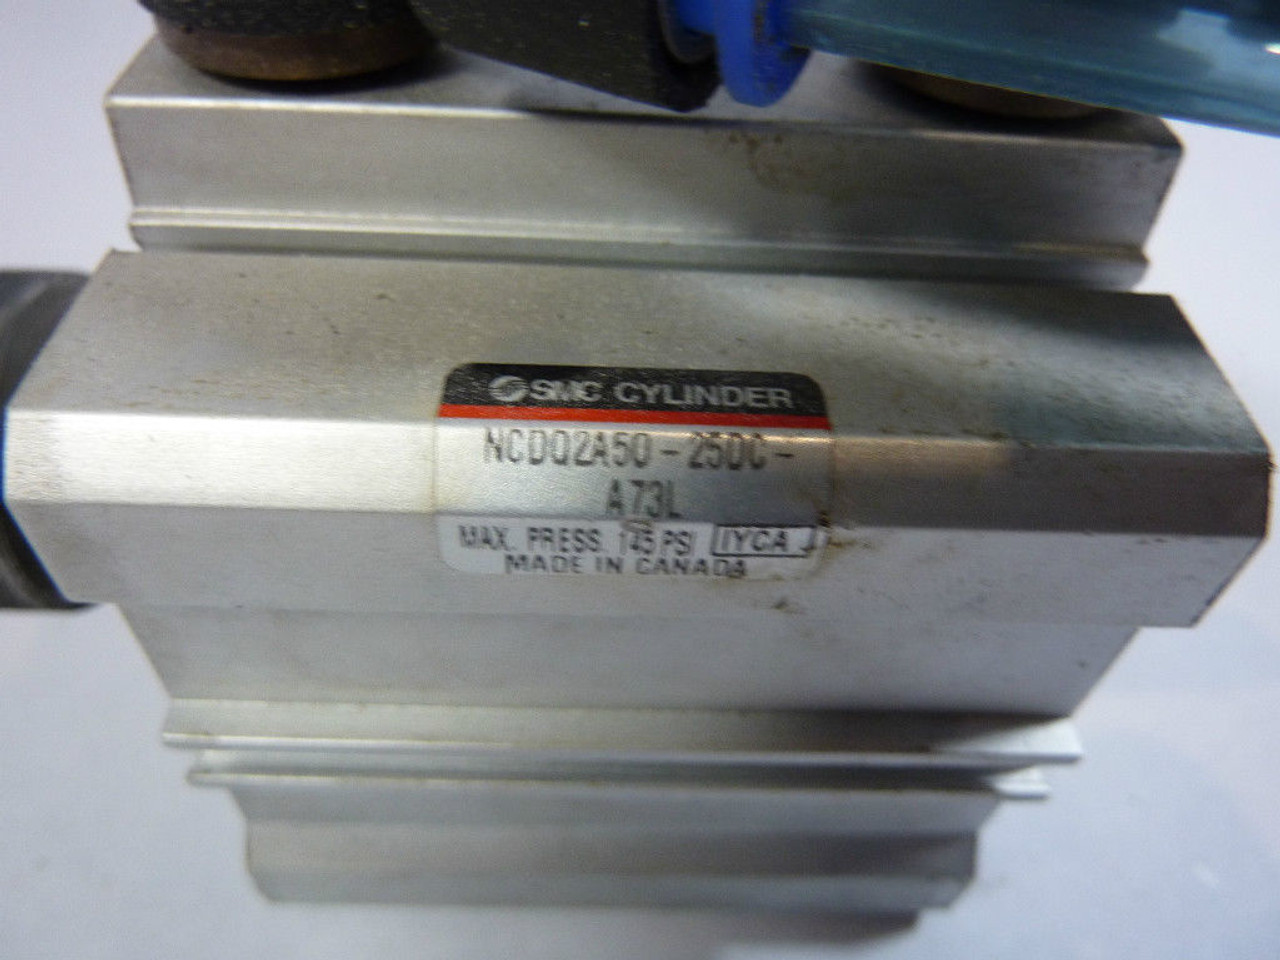 SMC NCDQ2A50-25DC-A37L Pneumatic Cylinder USED